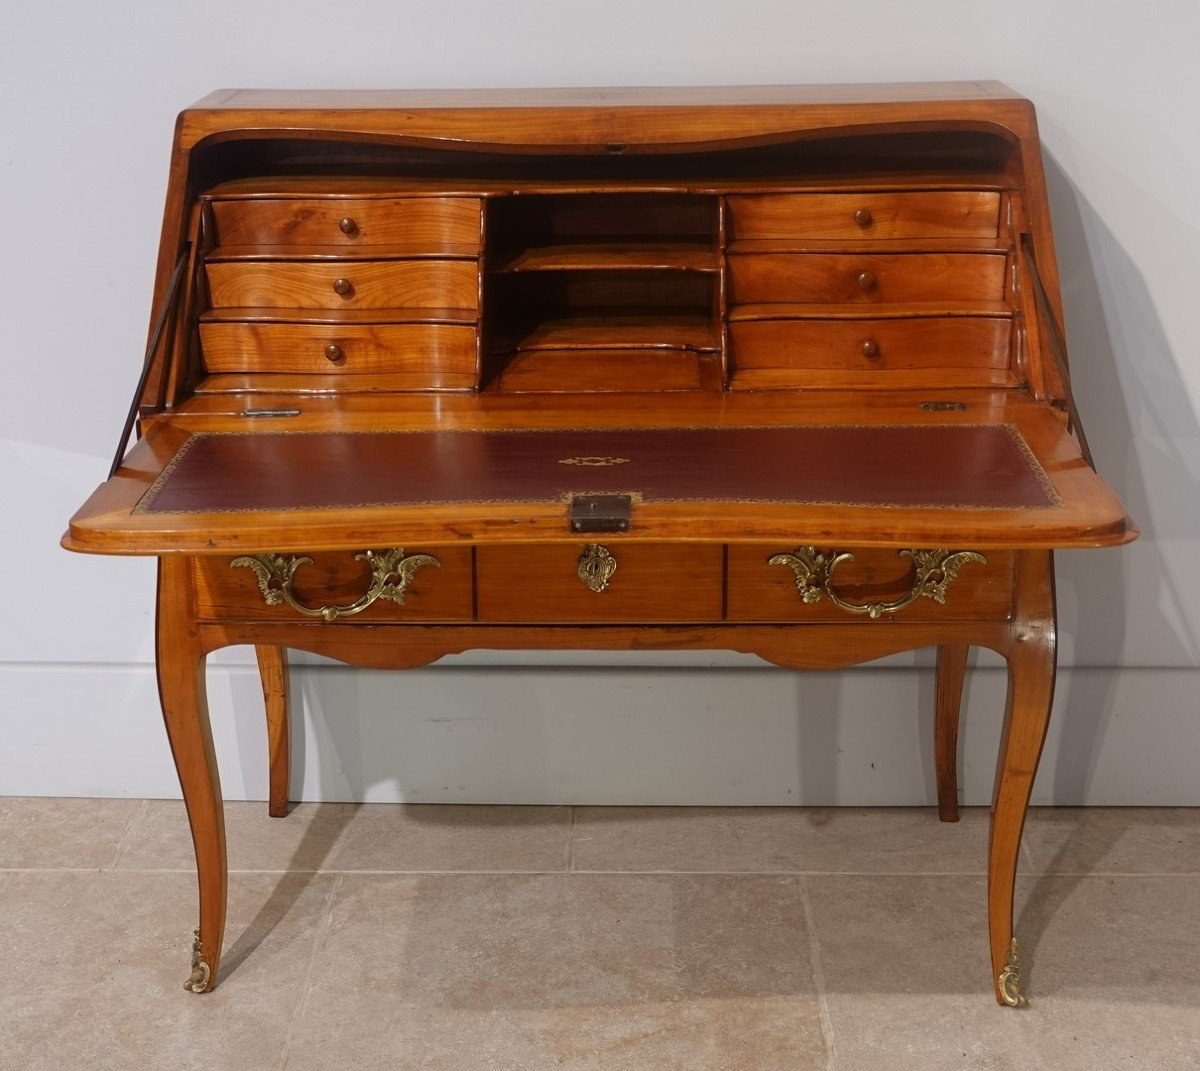 Donkey's Desk Or Louis XV Sloping Desk From The 18th Century-photo-2